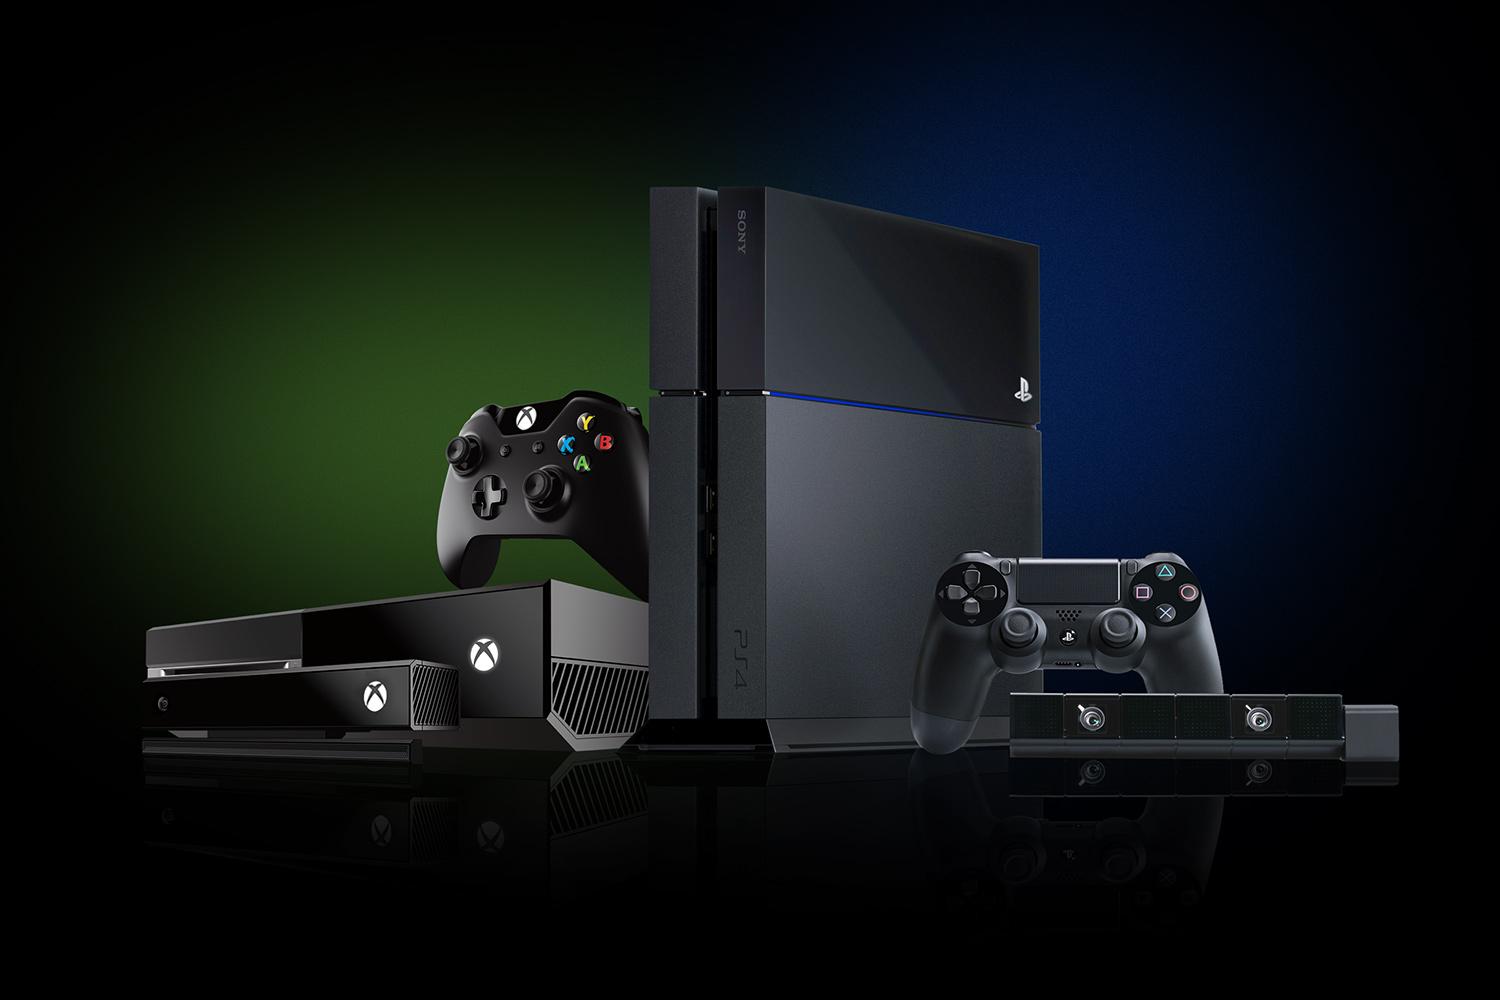 Berygtet stilhed Uplifted PS4 vs. Xbox One: Which Console Is Better for You? | Digital Trends